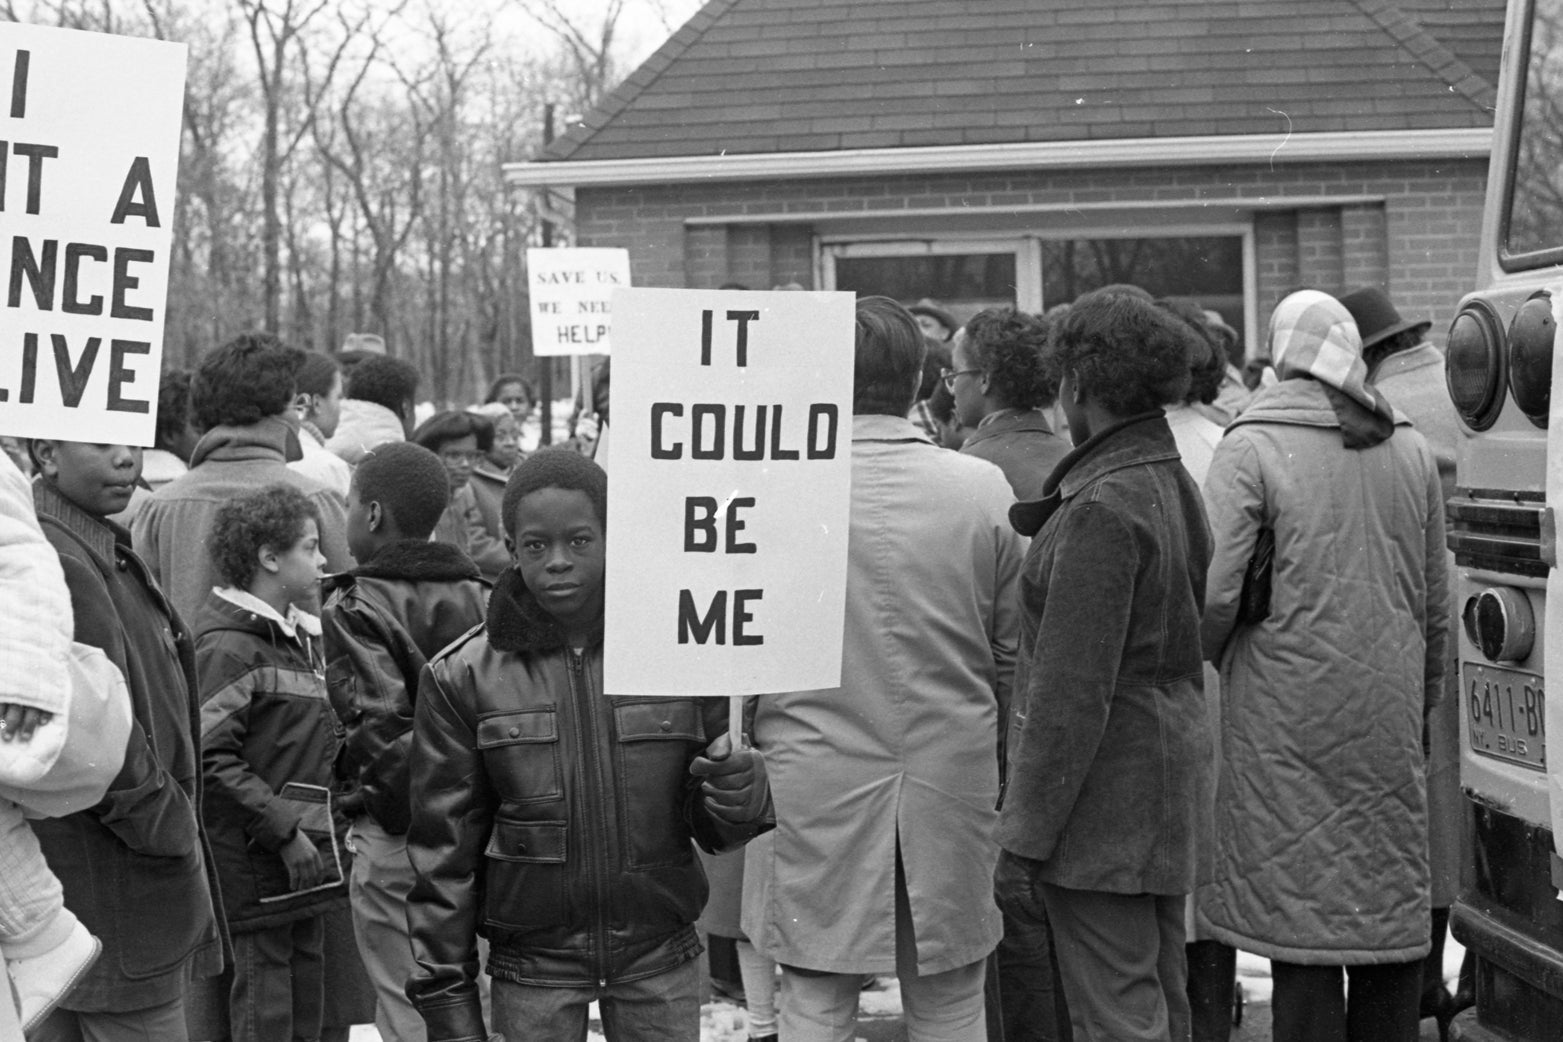 A black-and-white photo shows a black child carrying a serious expression and a sign that reads "It could be me." He is standing facing away from a crowd that is staring at a house.